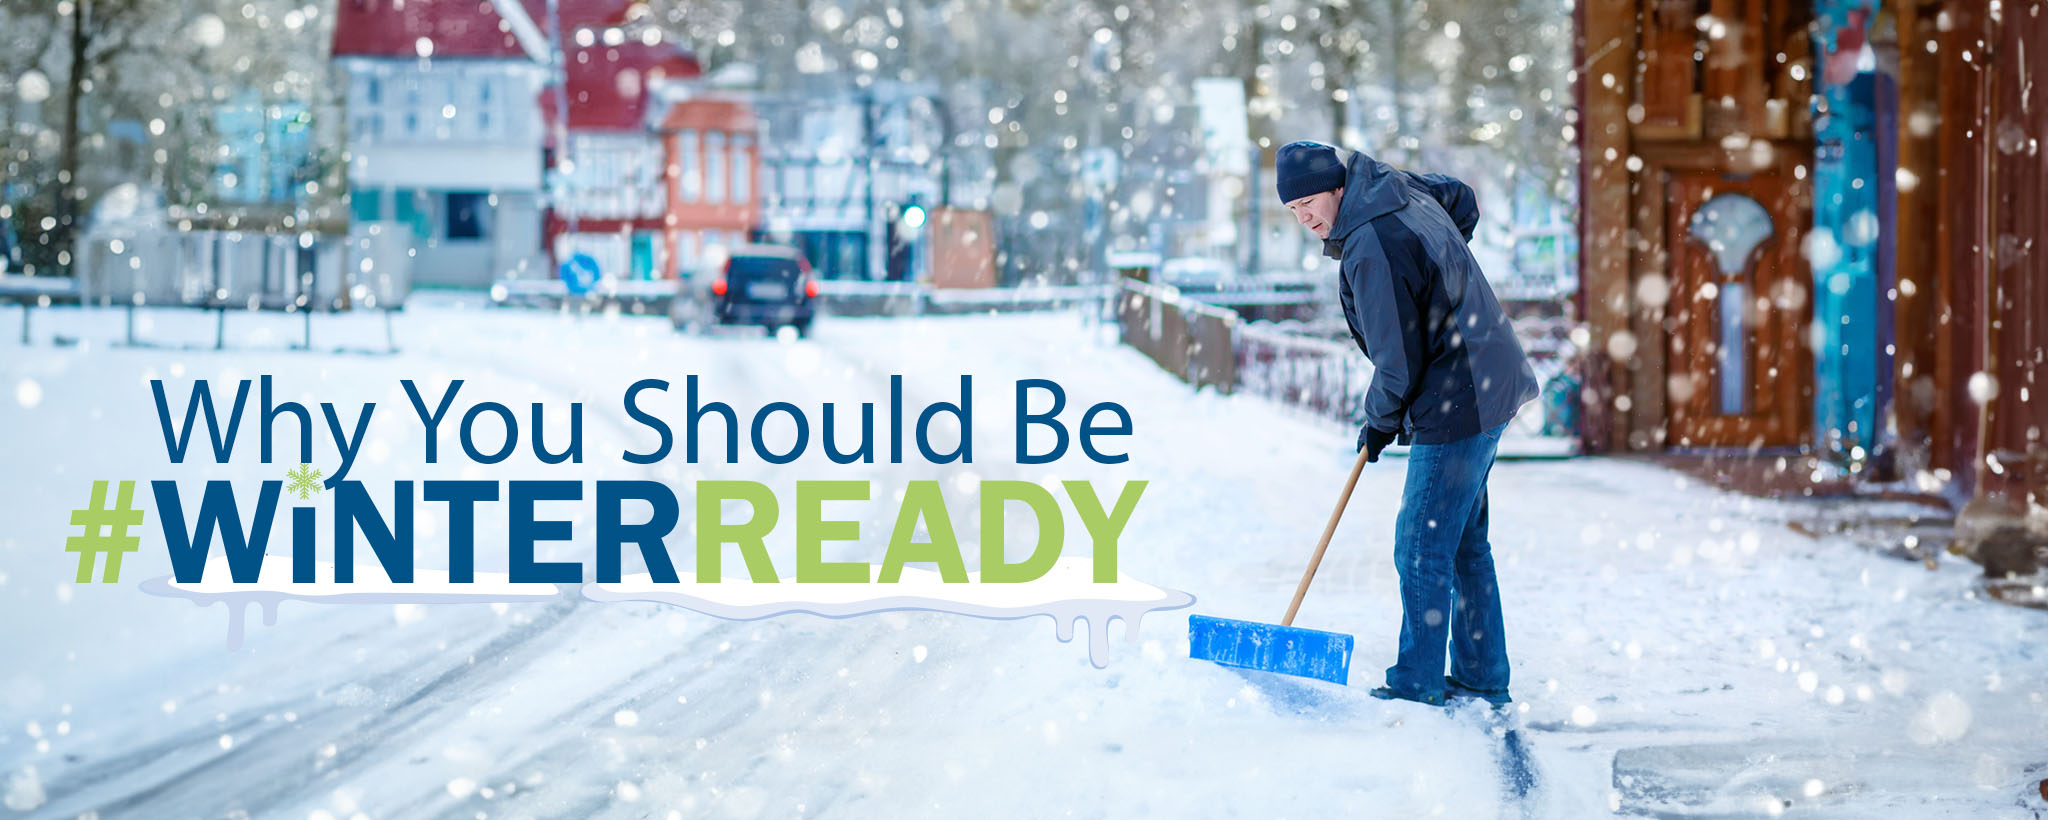 Man shoveling snow. Why you should be #WinterReady 